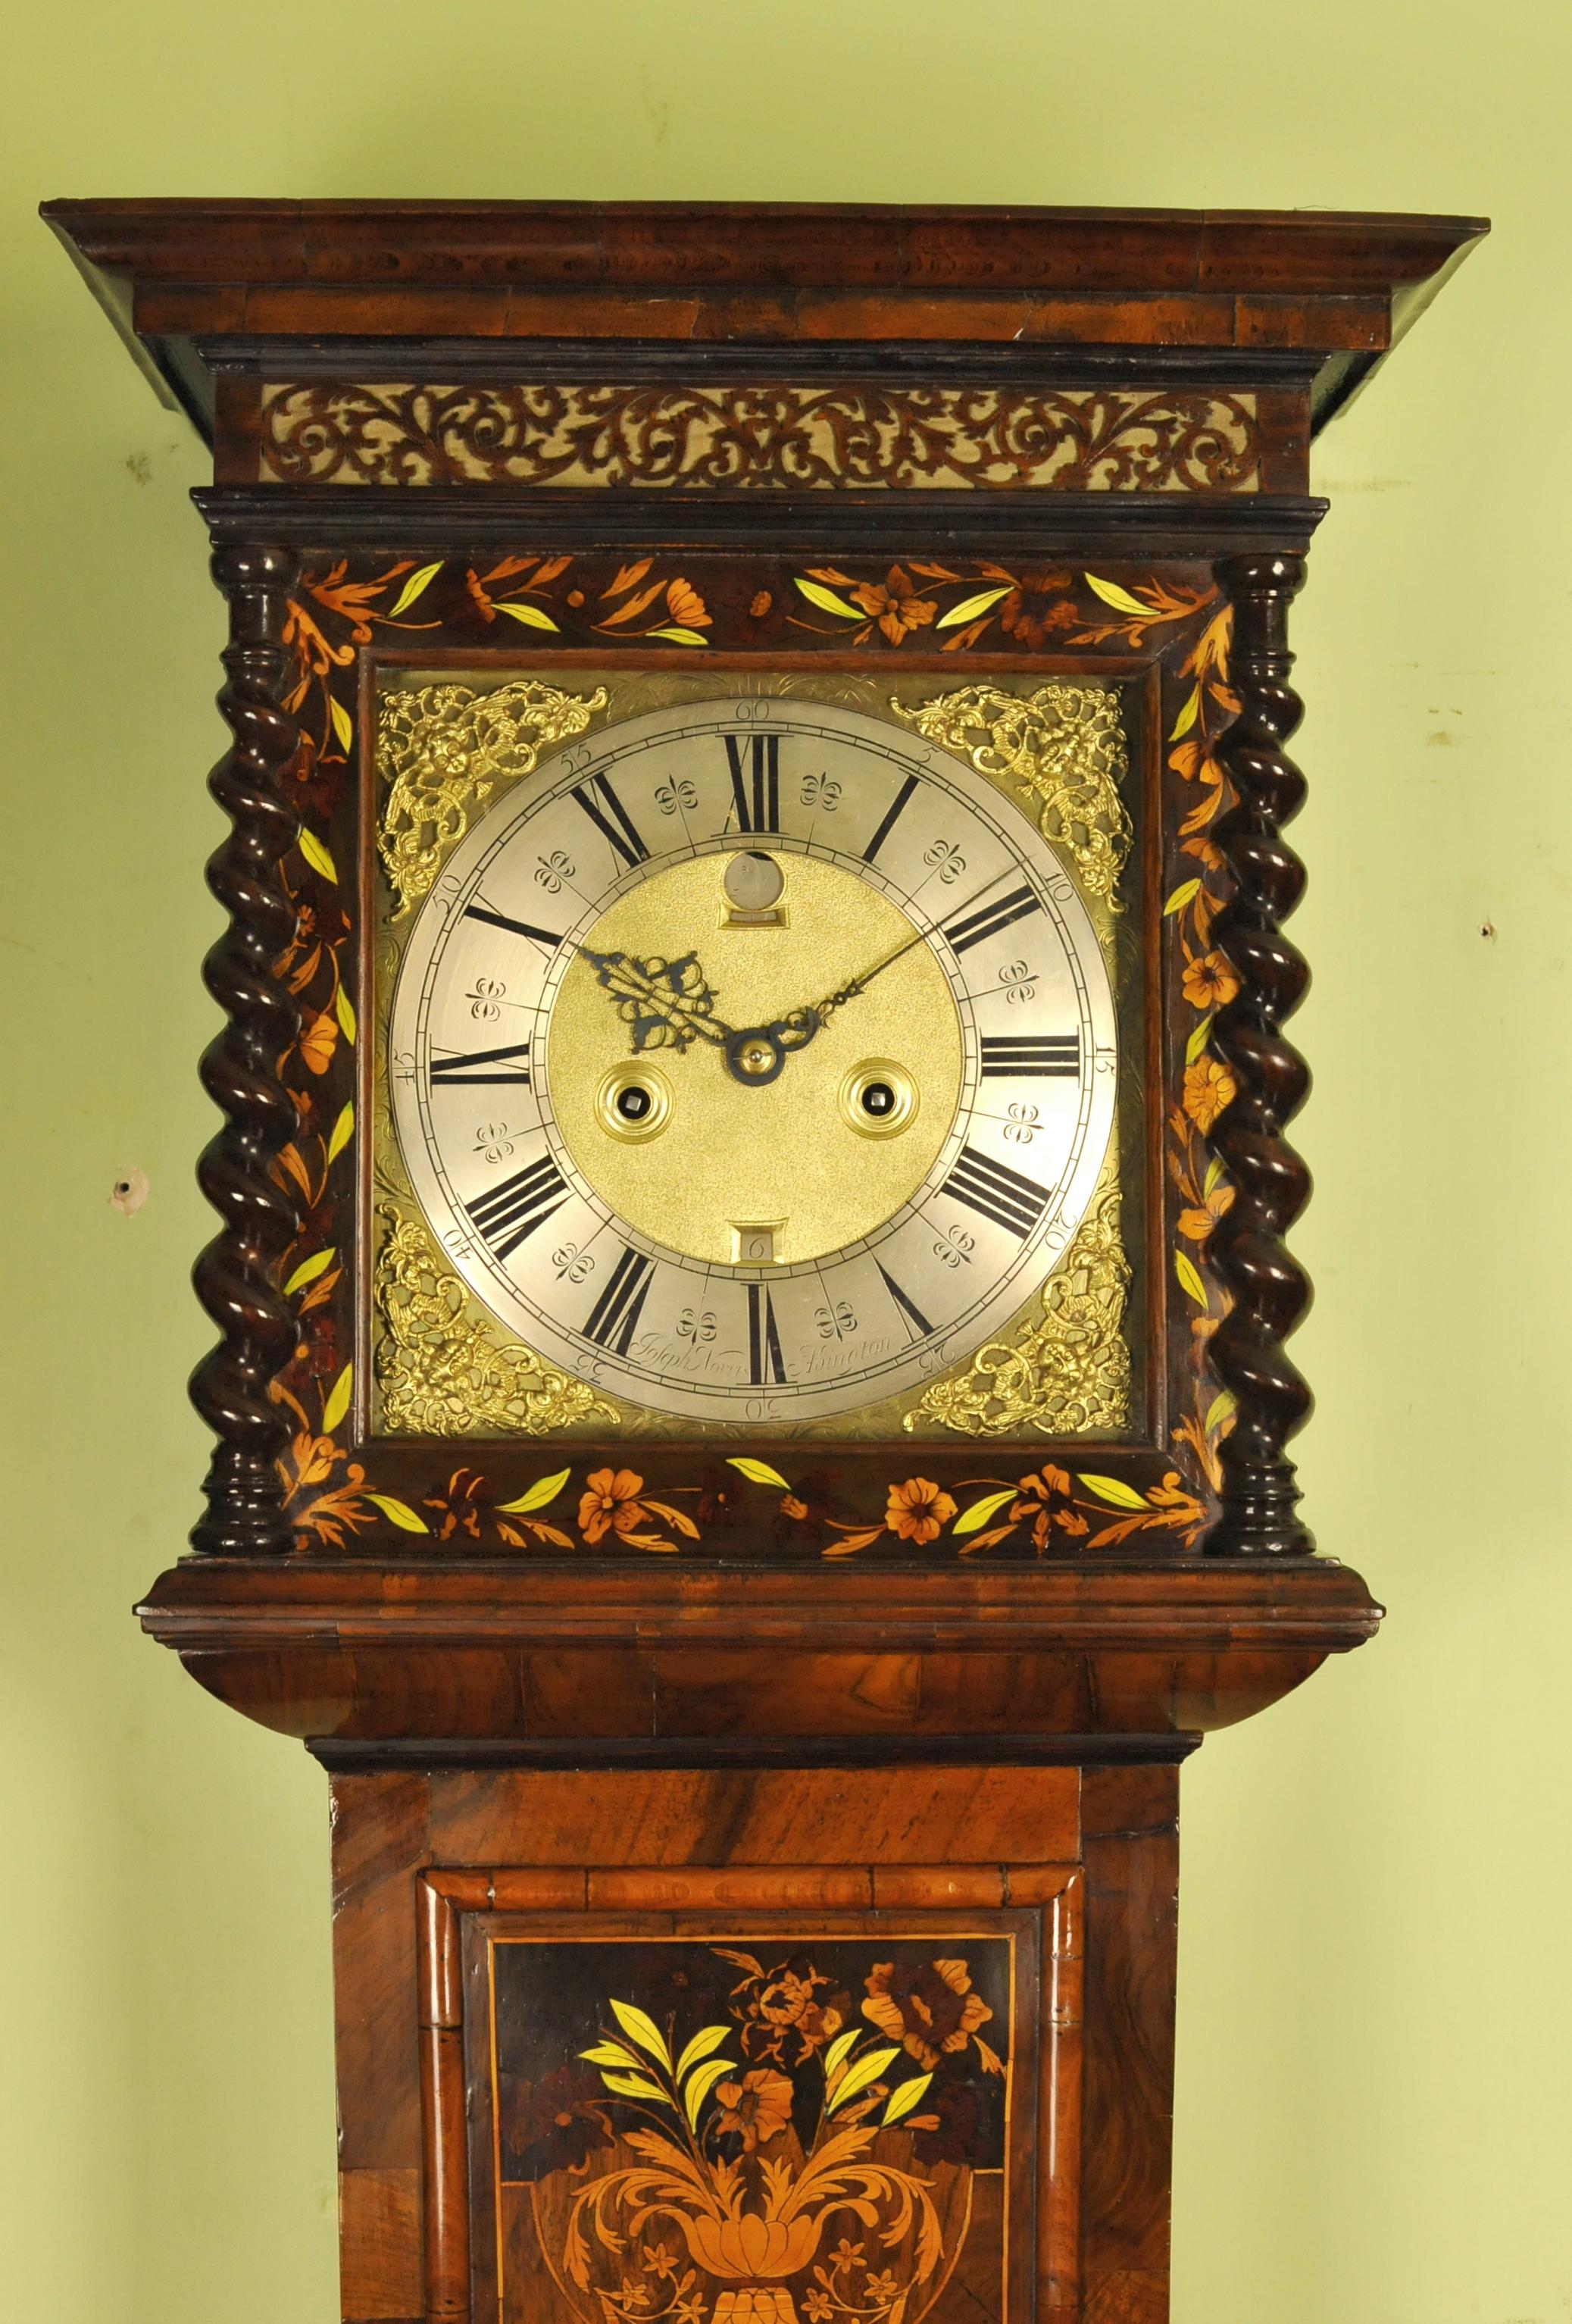 We are delighted to offer for sale this superb marquetry longcase clock from the golden age of clockmaking with an 11 inch dial by the eminent clockmaker Samuel Norris Abingten (Abingdon) dating circa 1695.
The brass chapter ring dial is signed by